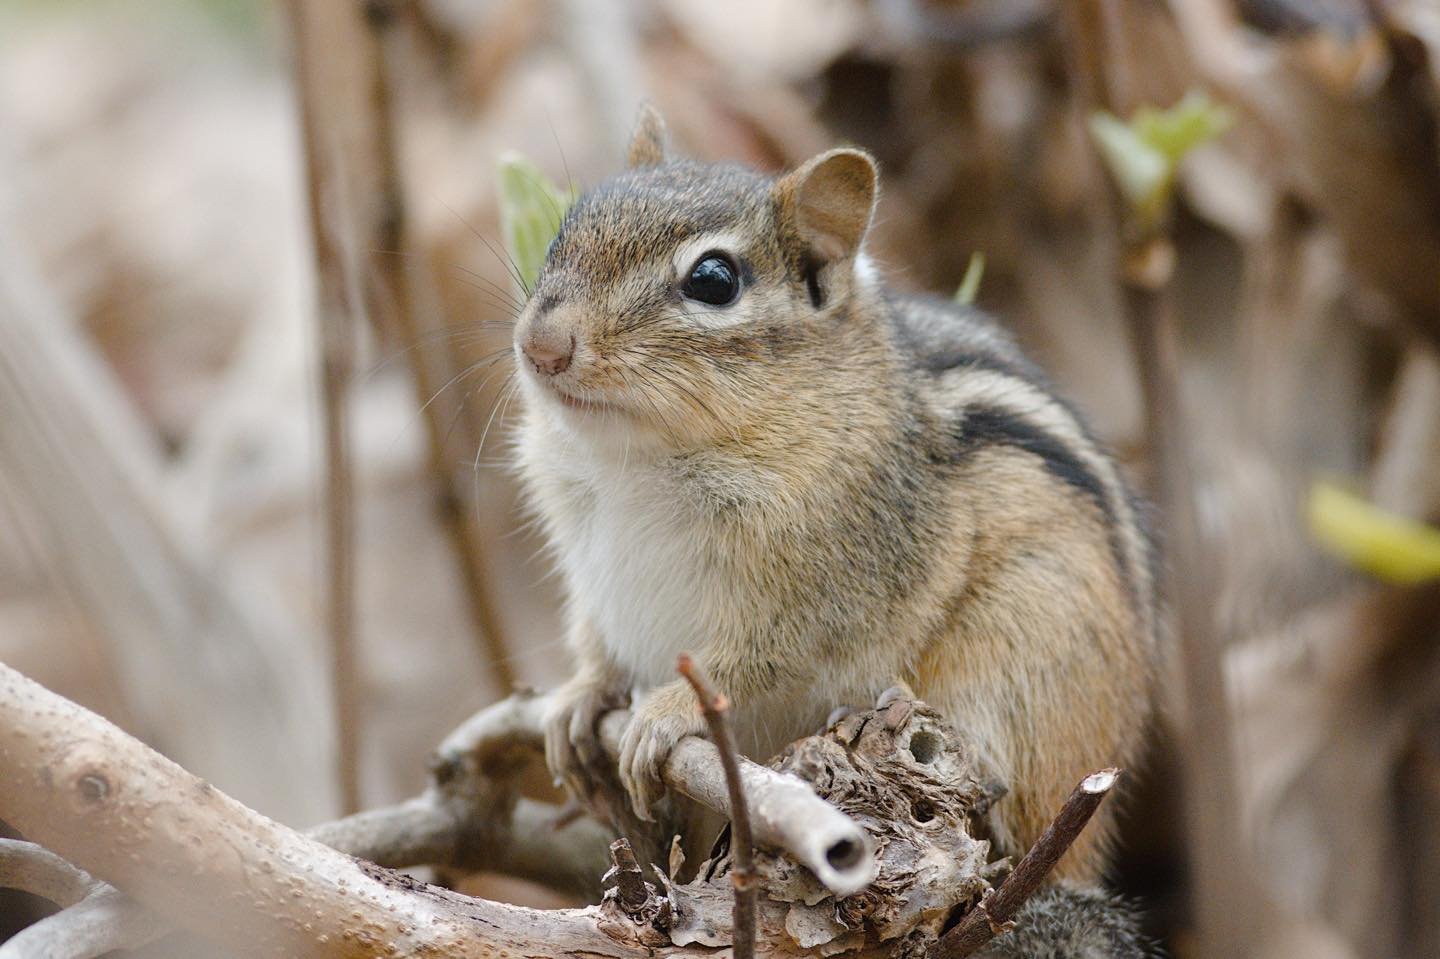 All rodents have constantly growing front teeth (incisors) which need to be used to avoid them becoming too long.

(Eastern chipmunk)

#igdaily #instagood #photo #newenglandwildlife #earthfocus #naturewalk #naturephotography #newenglandnature #digita